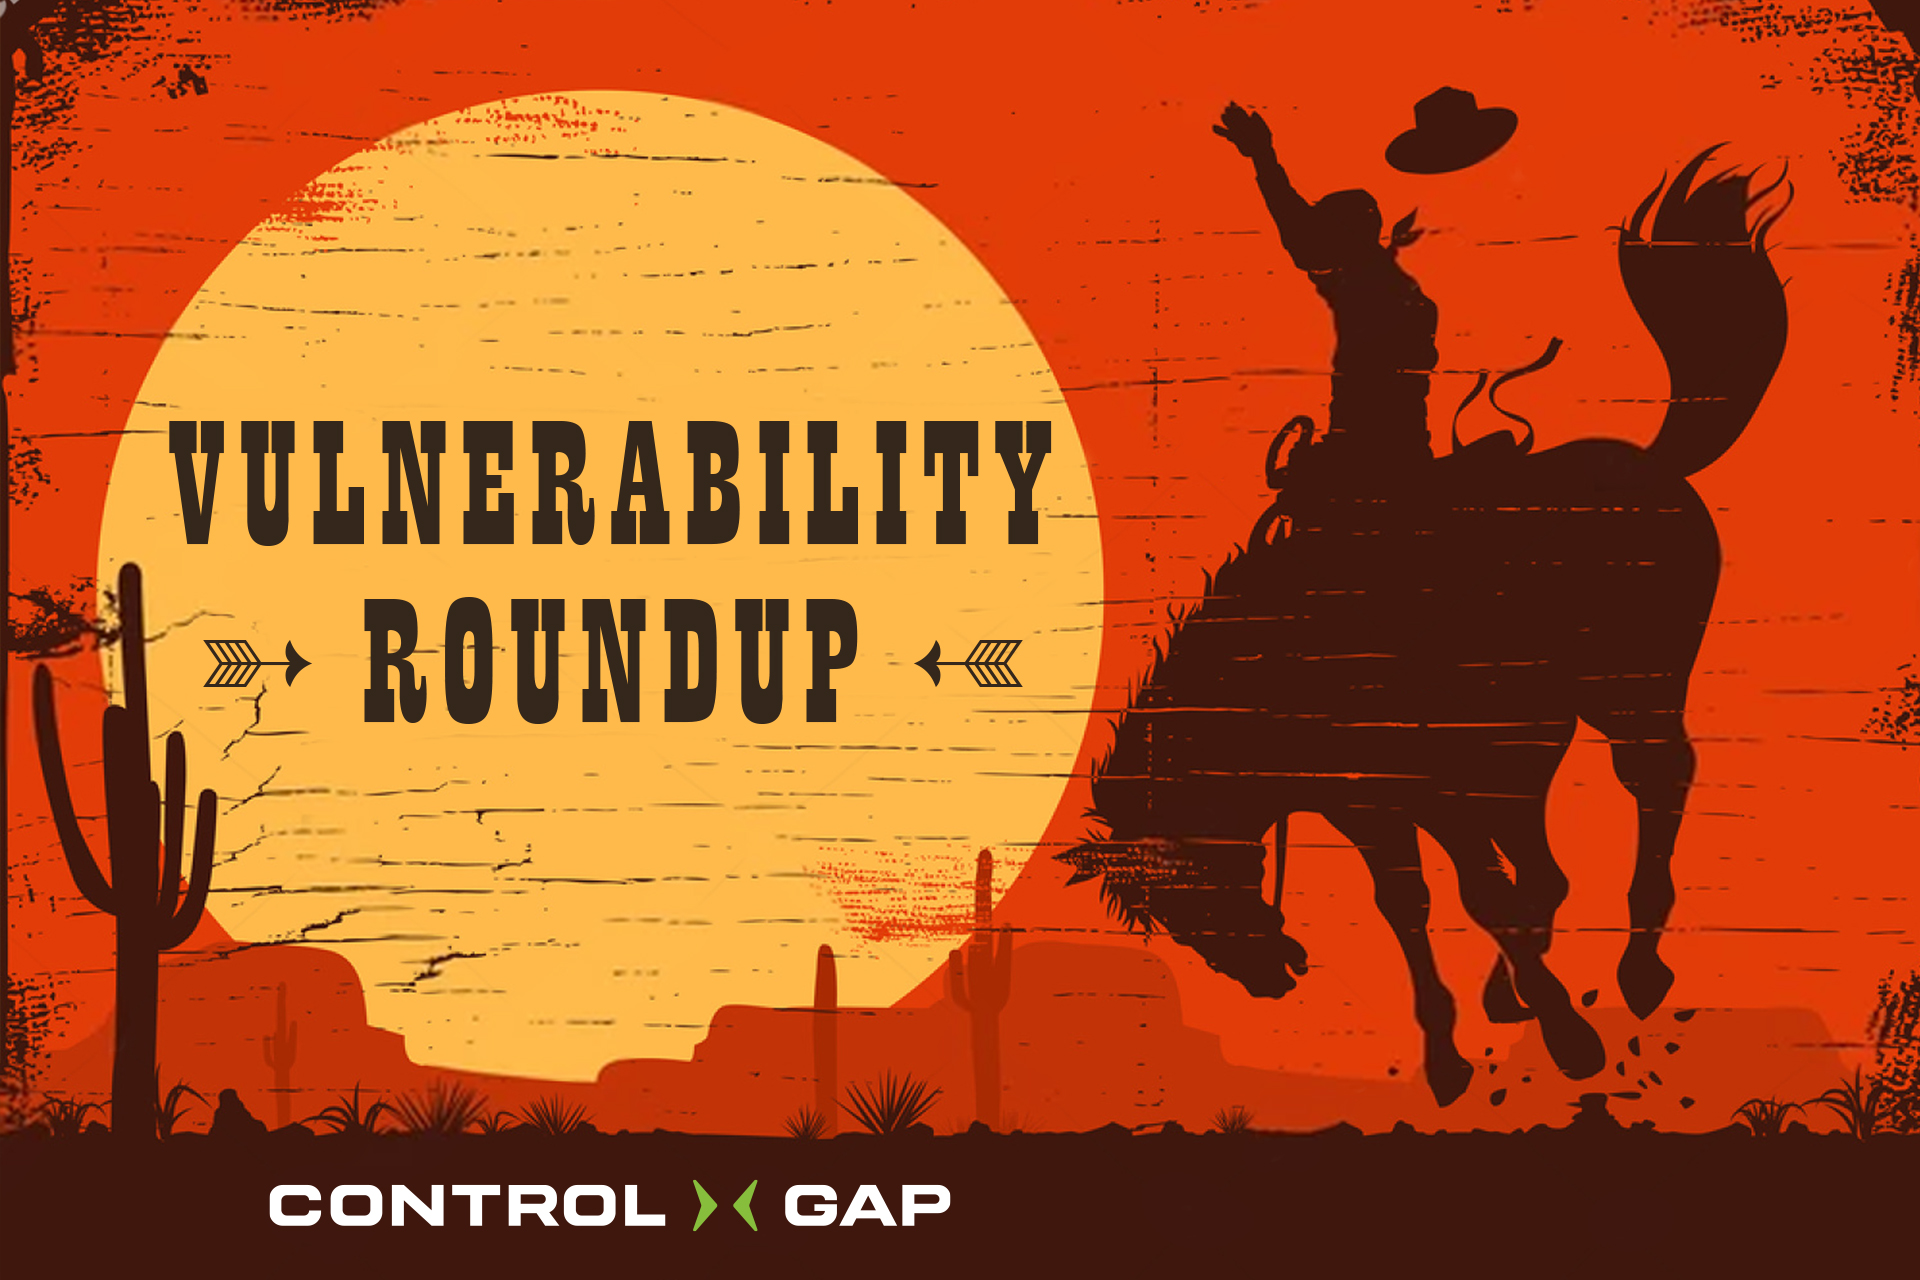 Control Gap Vulnerability Roundup: January 21st to January 27th